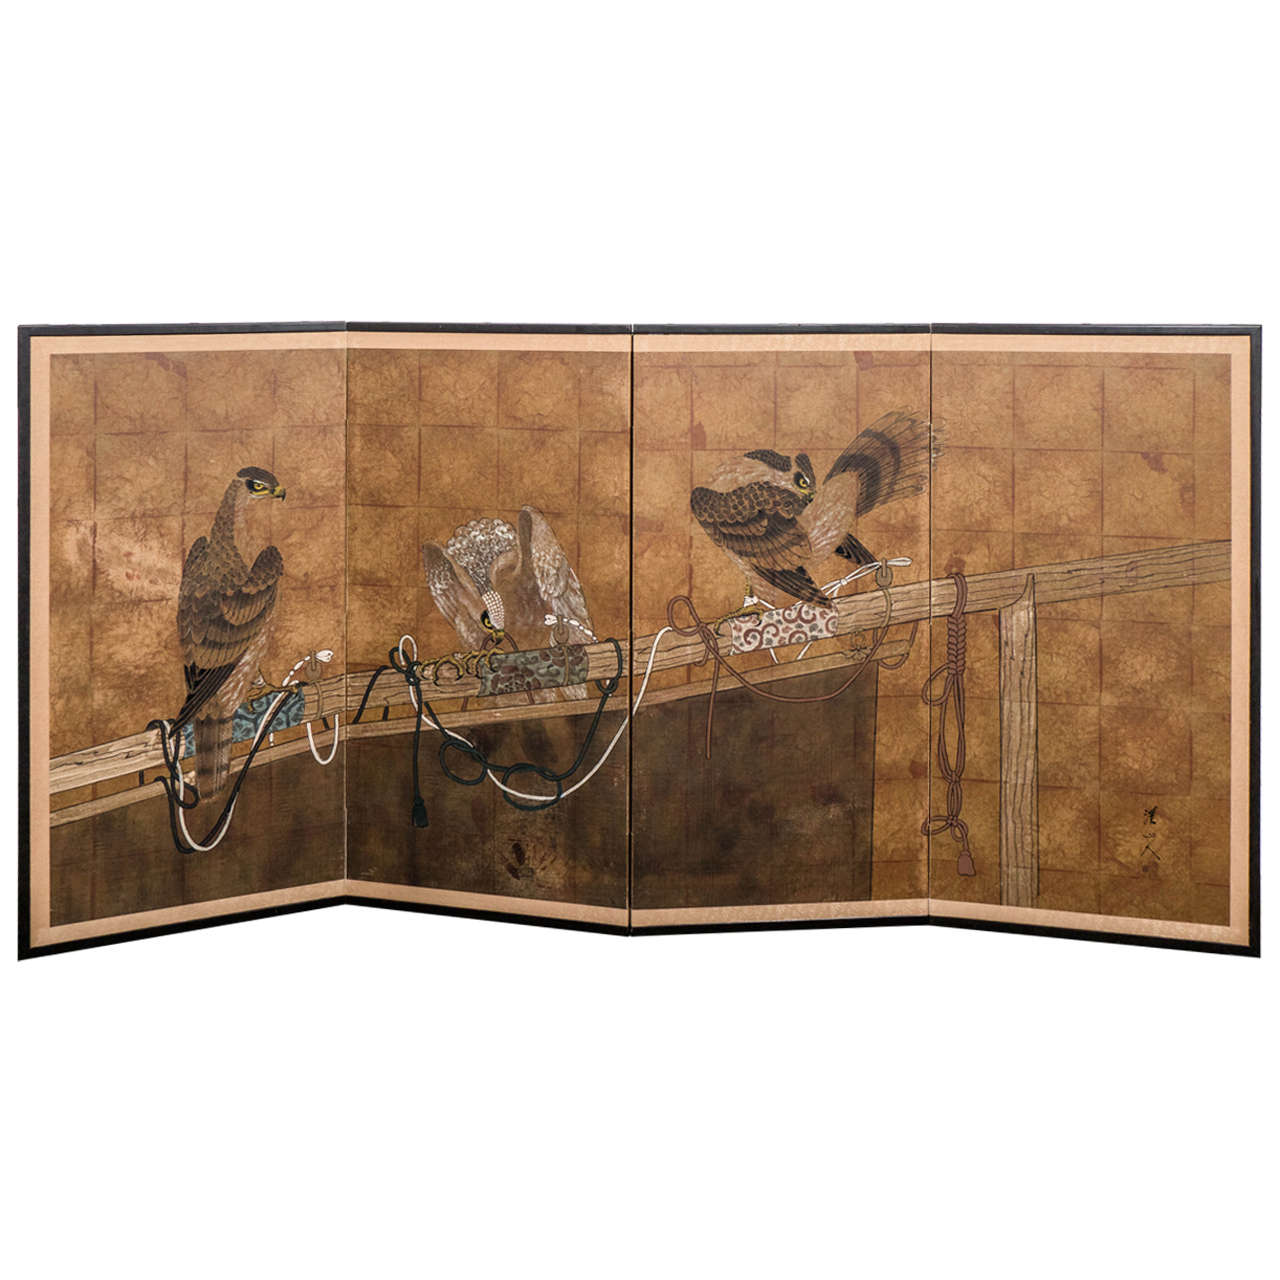 Early 20th Century Japanese Four-Panel Screen with Falcon Design